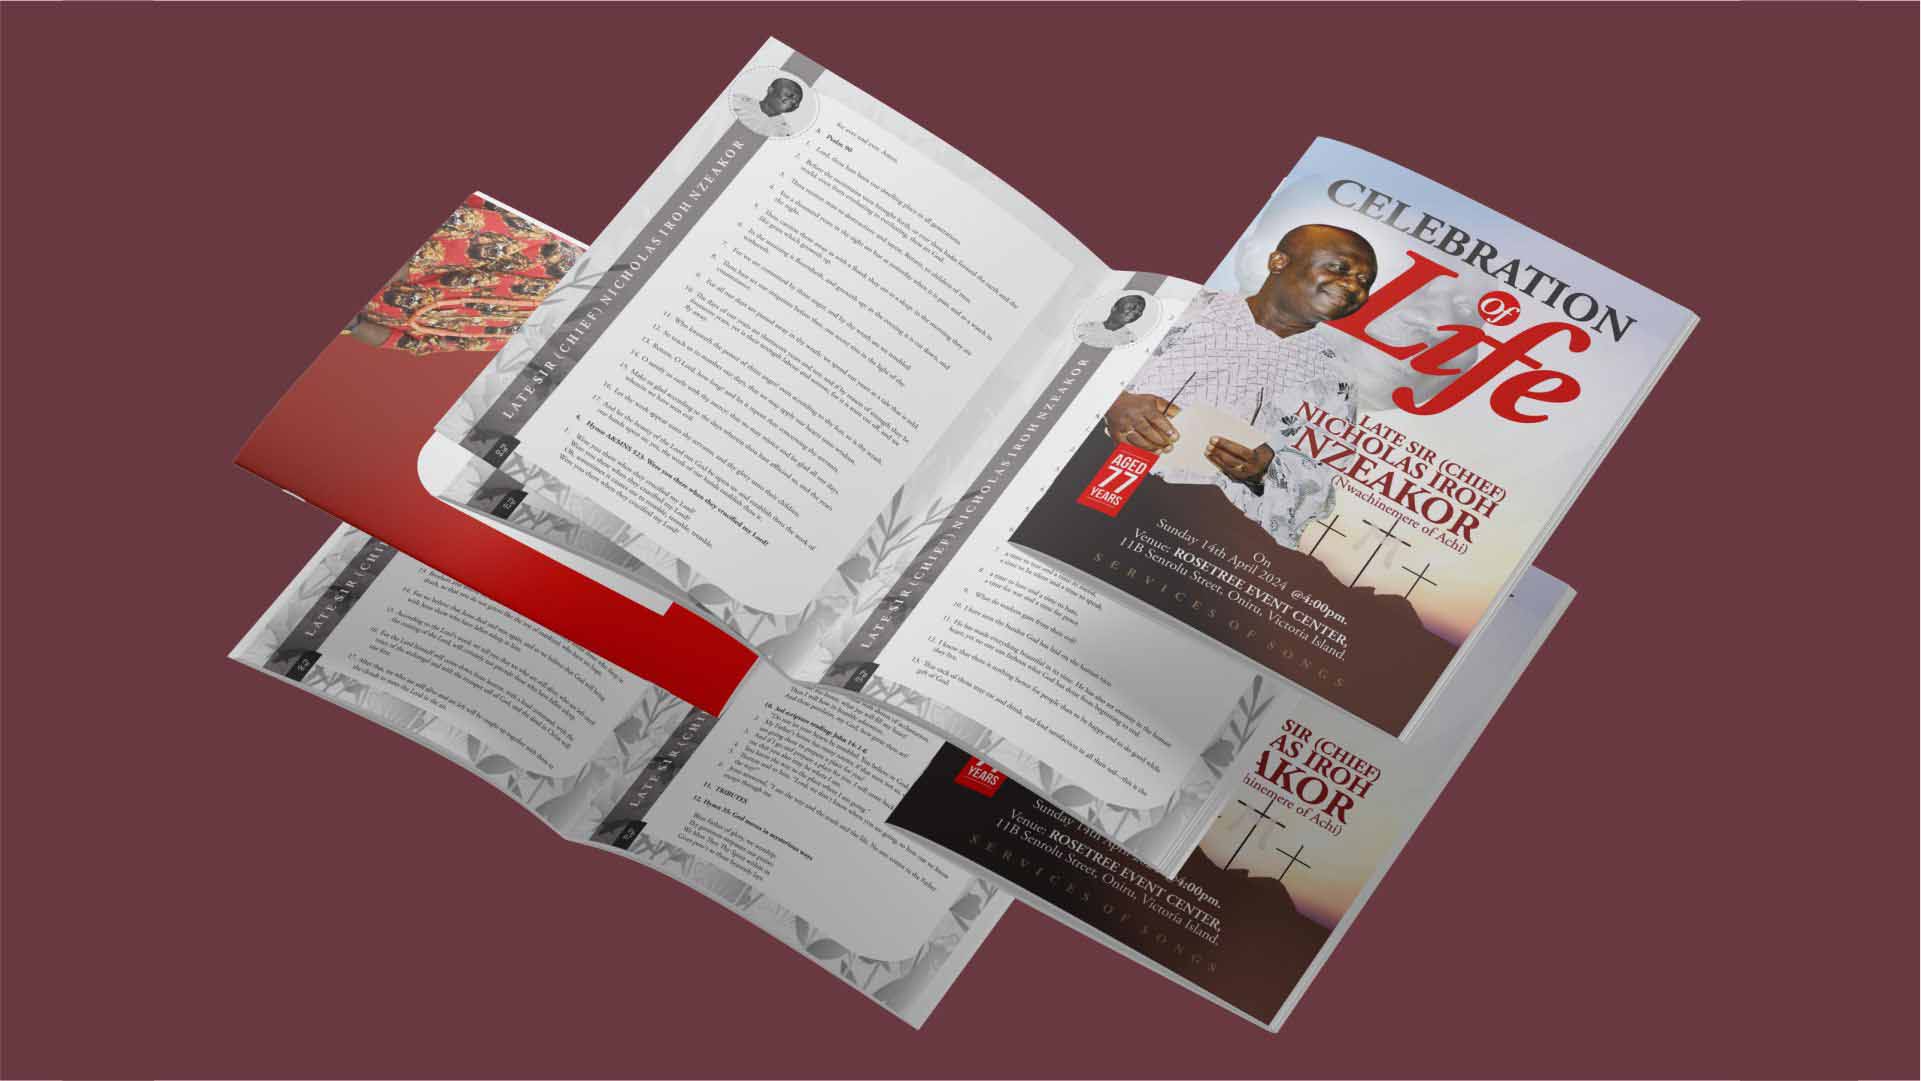 Funeral Service of Songs Programme Print and Design in Lagos Nigeria